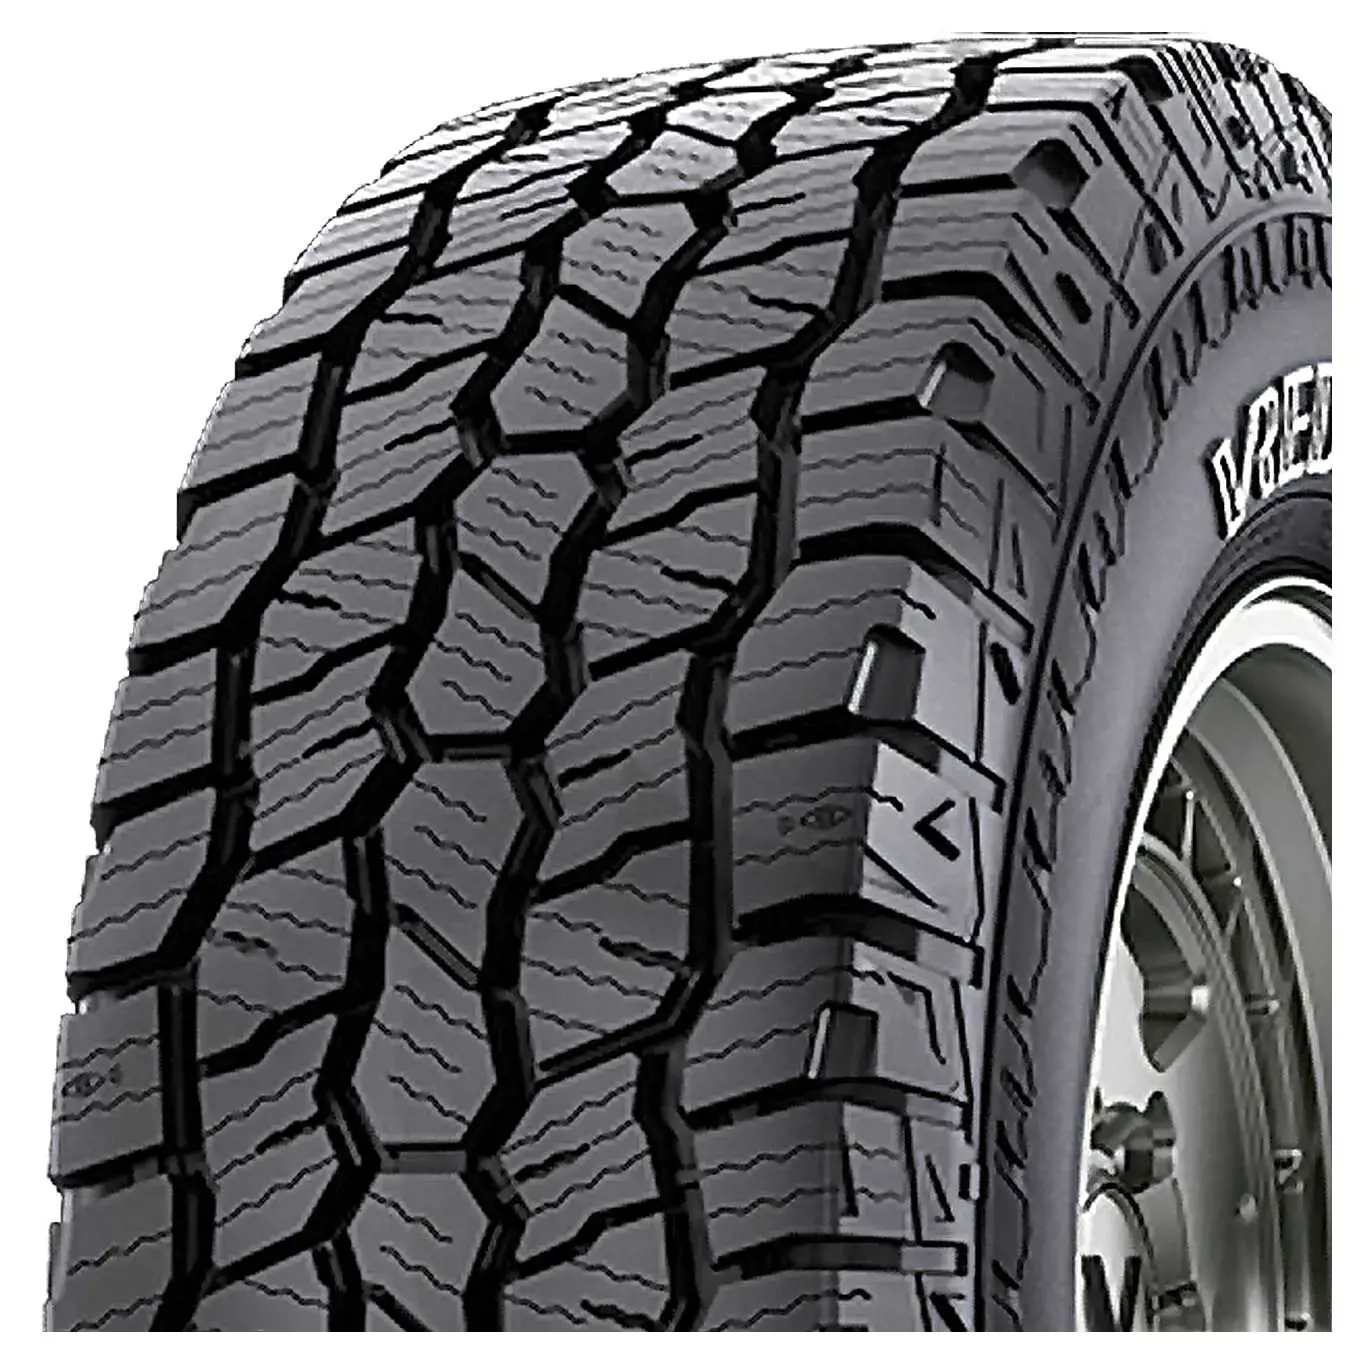 LT245/75 R16 120S/116S PINZA AT BSW